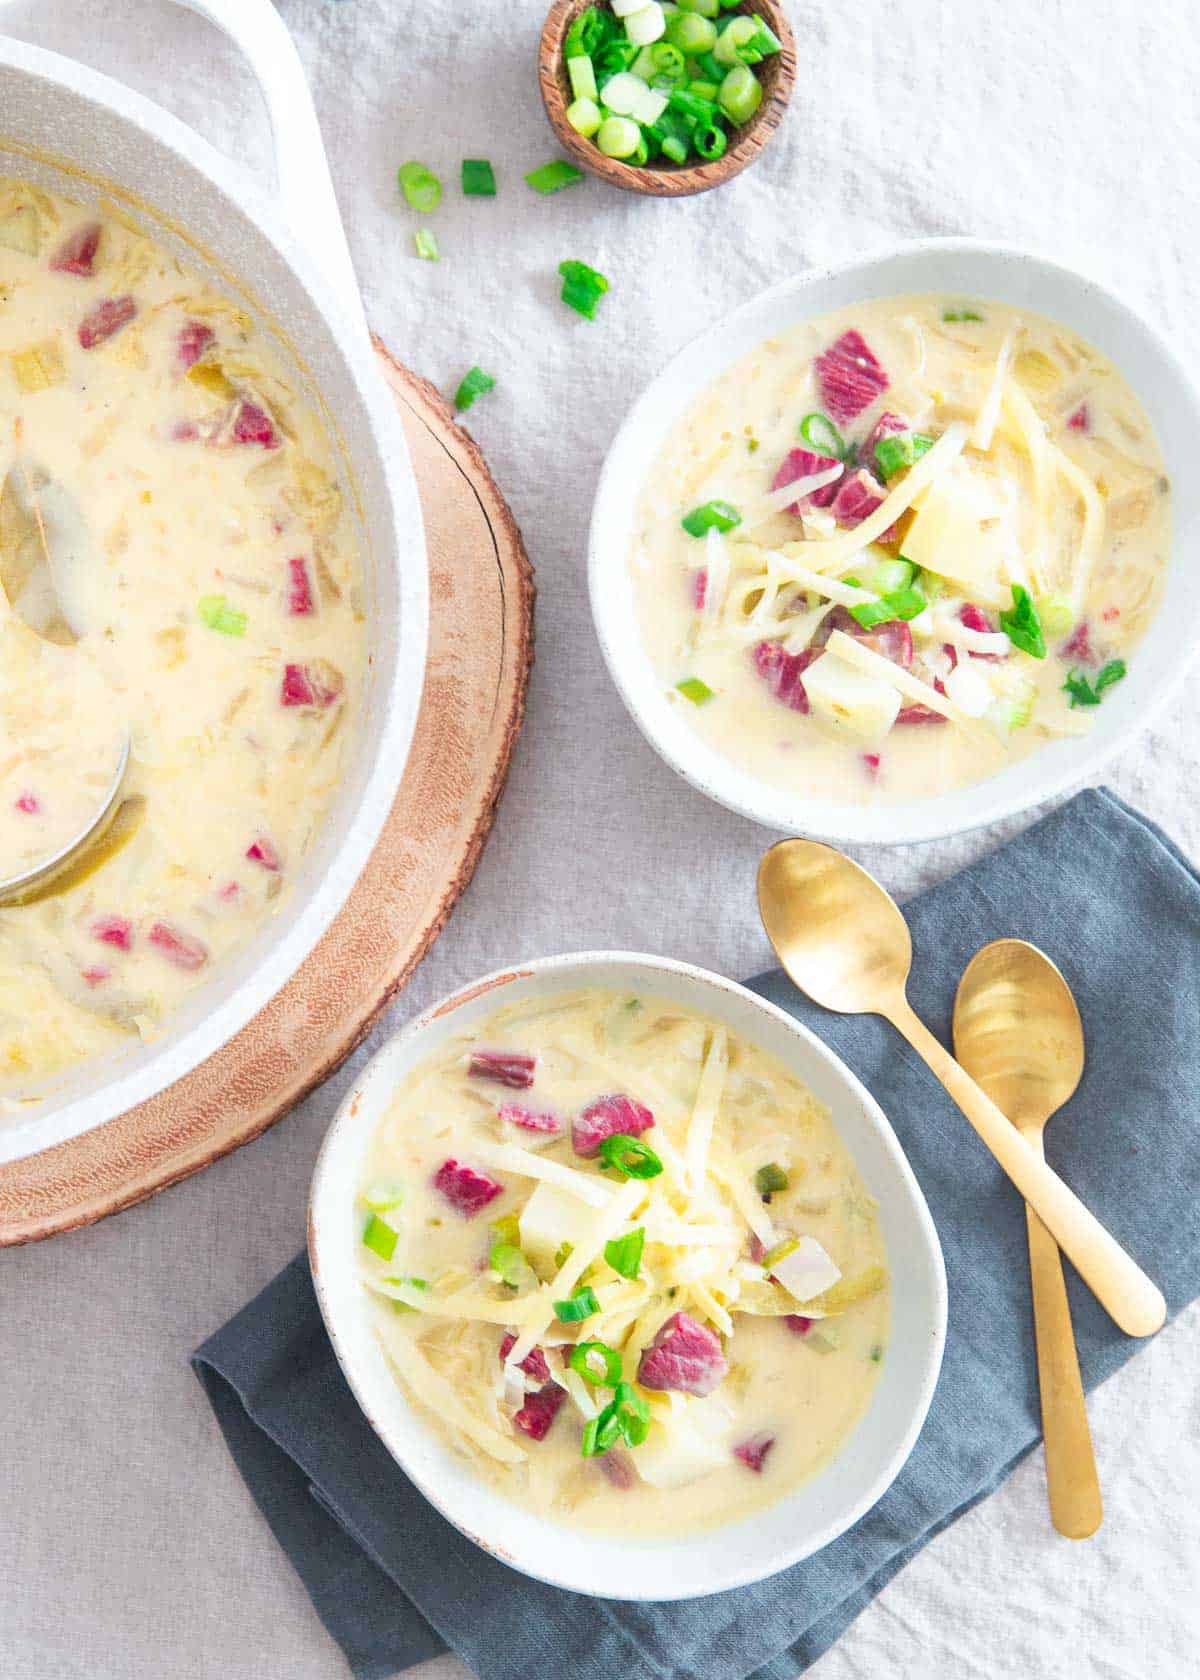 If you love a Reuben sandwich you'll love this creamy soup made with corned beef, sauerkraut and Swiss cheese.